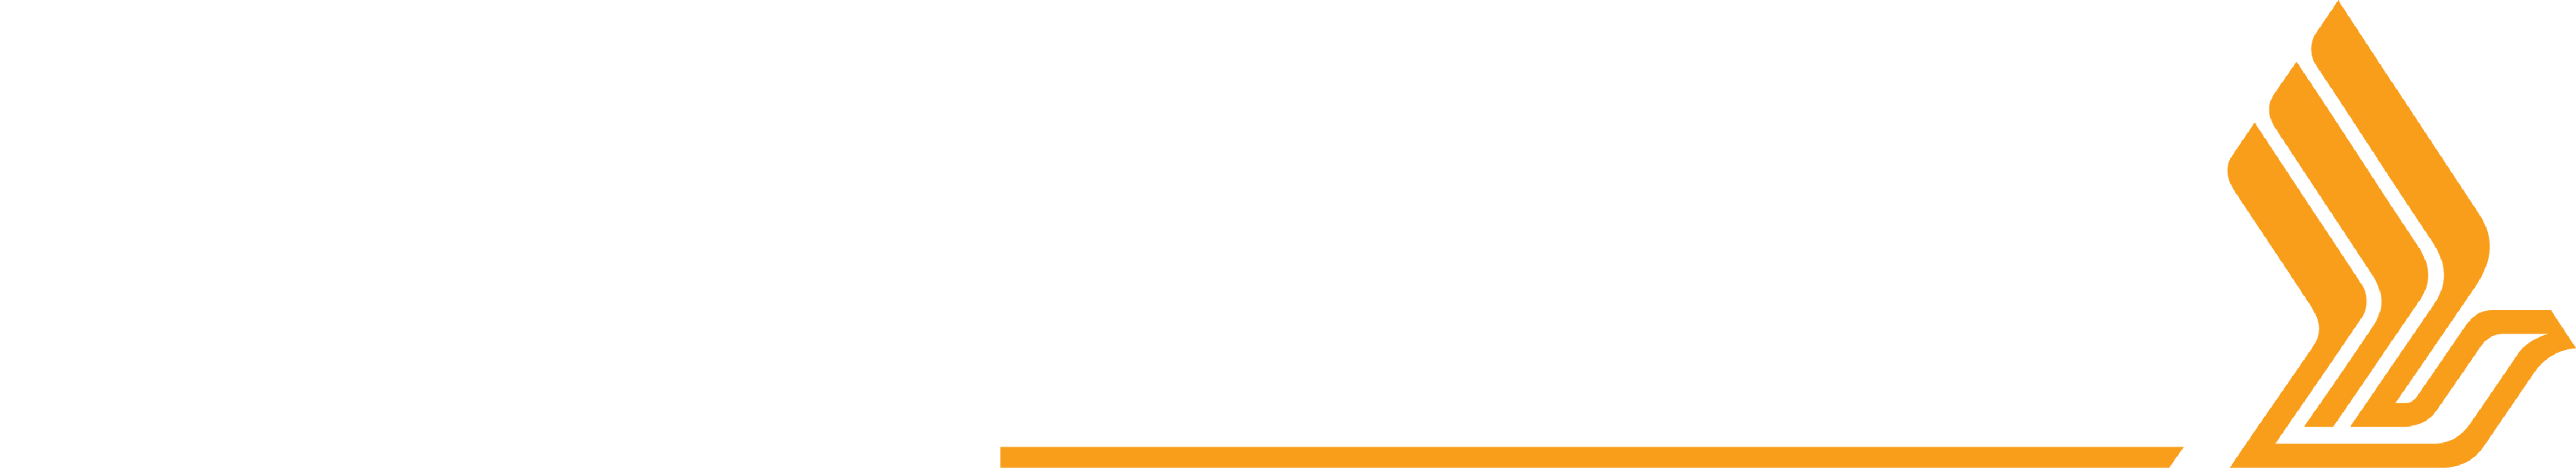 Singapore Airlines Image